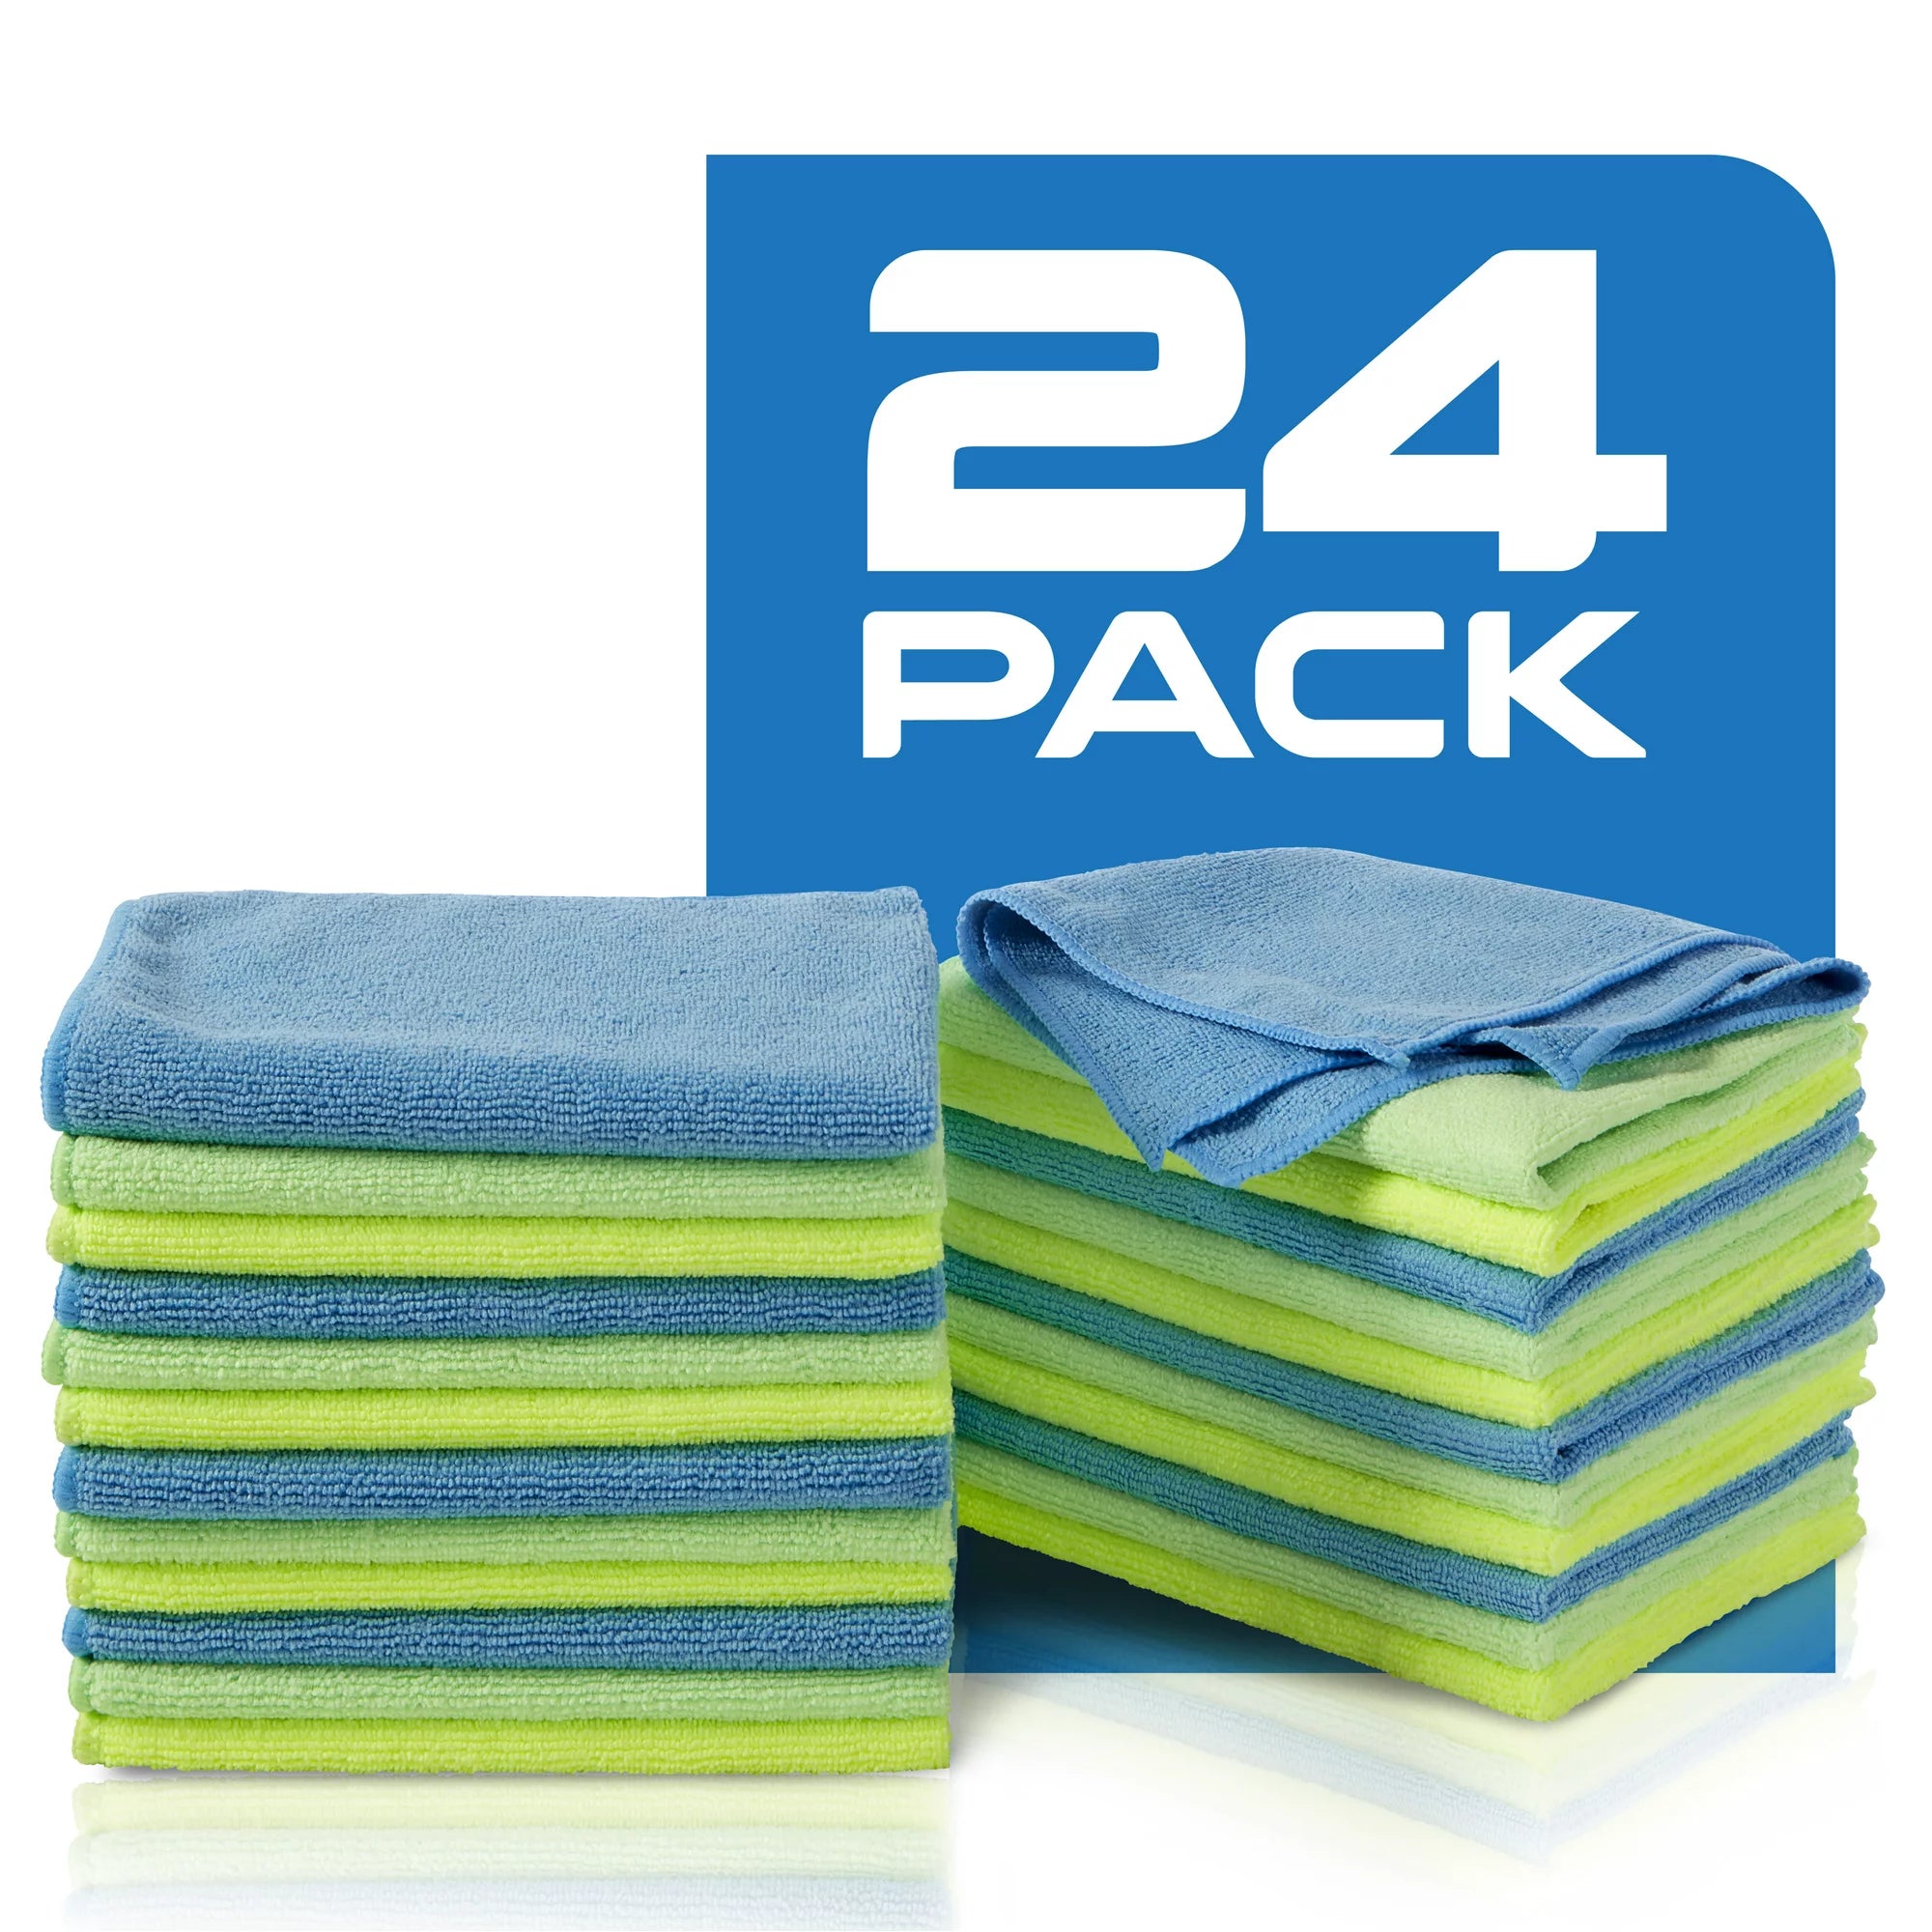 Zwipes 924 Microfiber Cleaning Cloths, Multicolor, 24 Pack